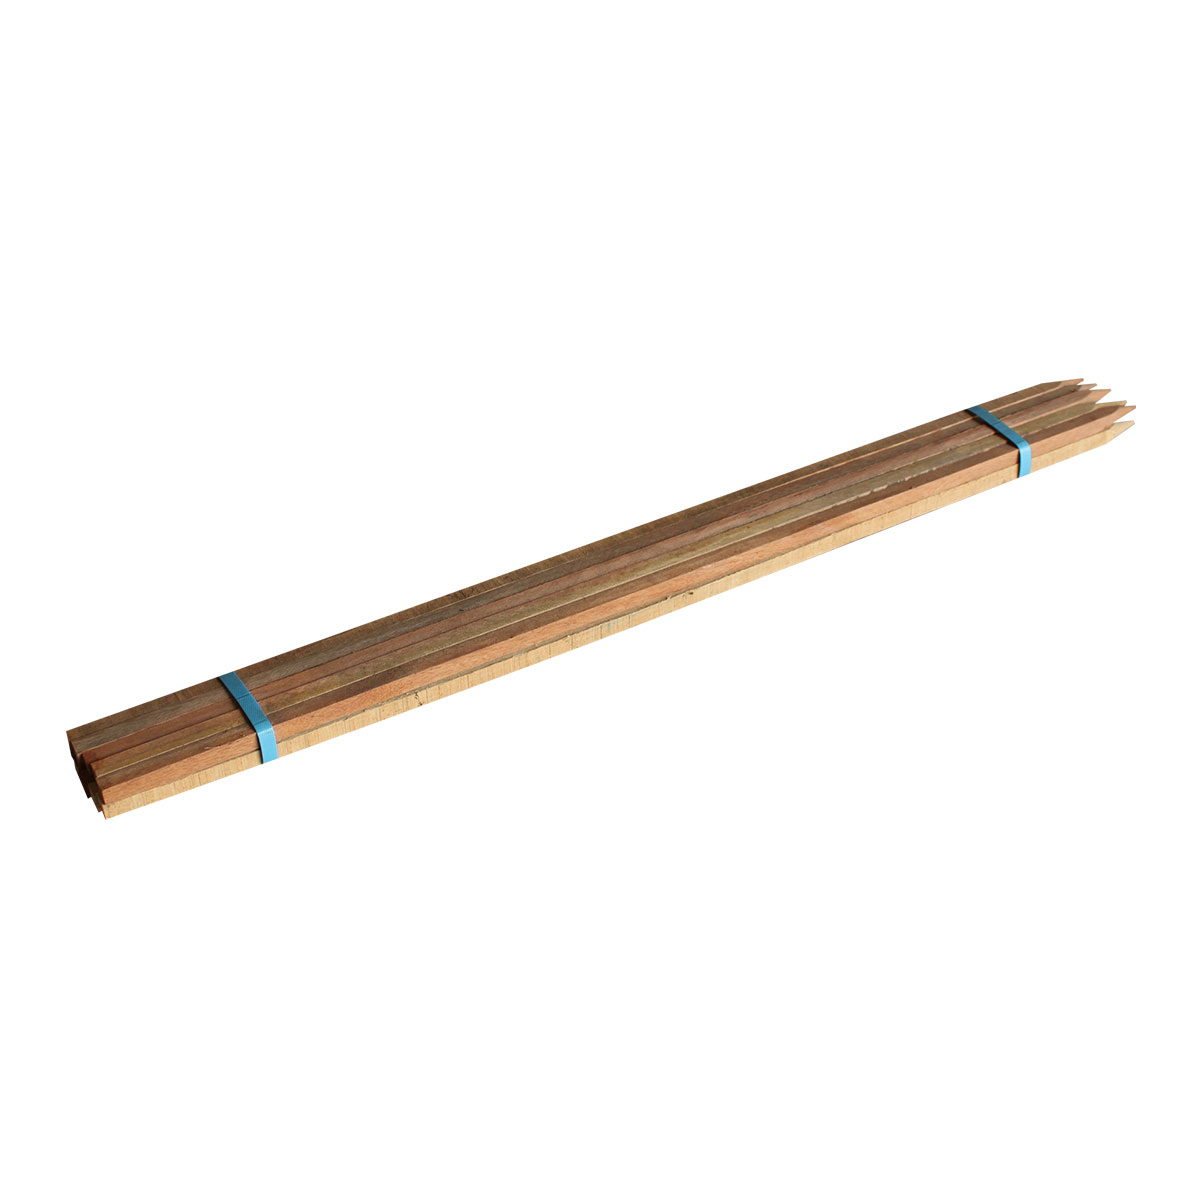 Hardwood Stakes 17 x 17 x 900mm - 10 Pack